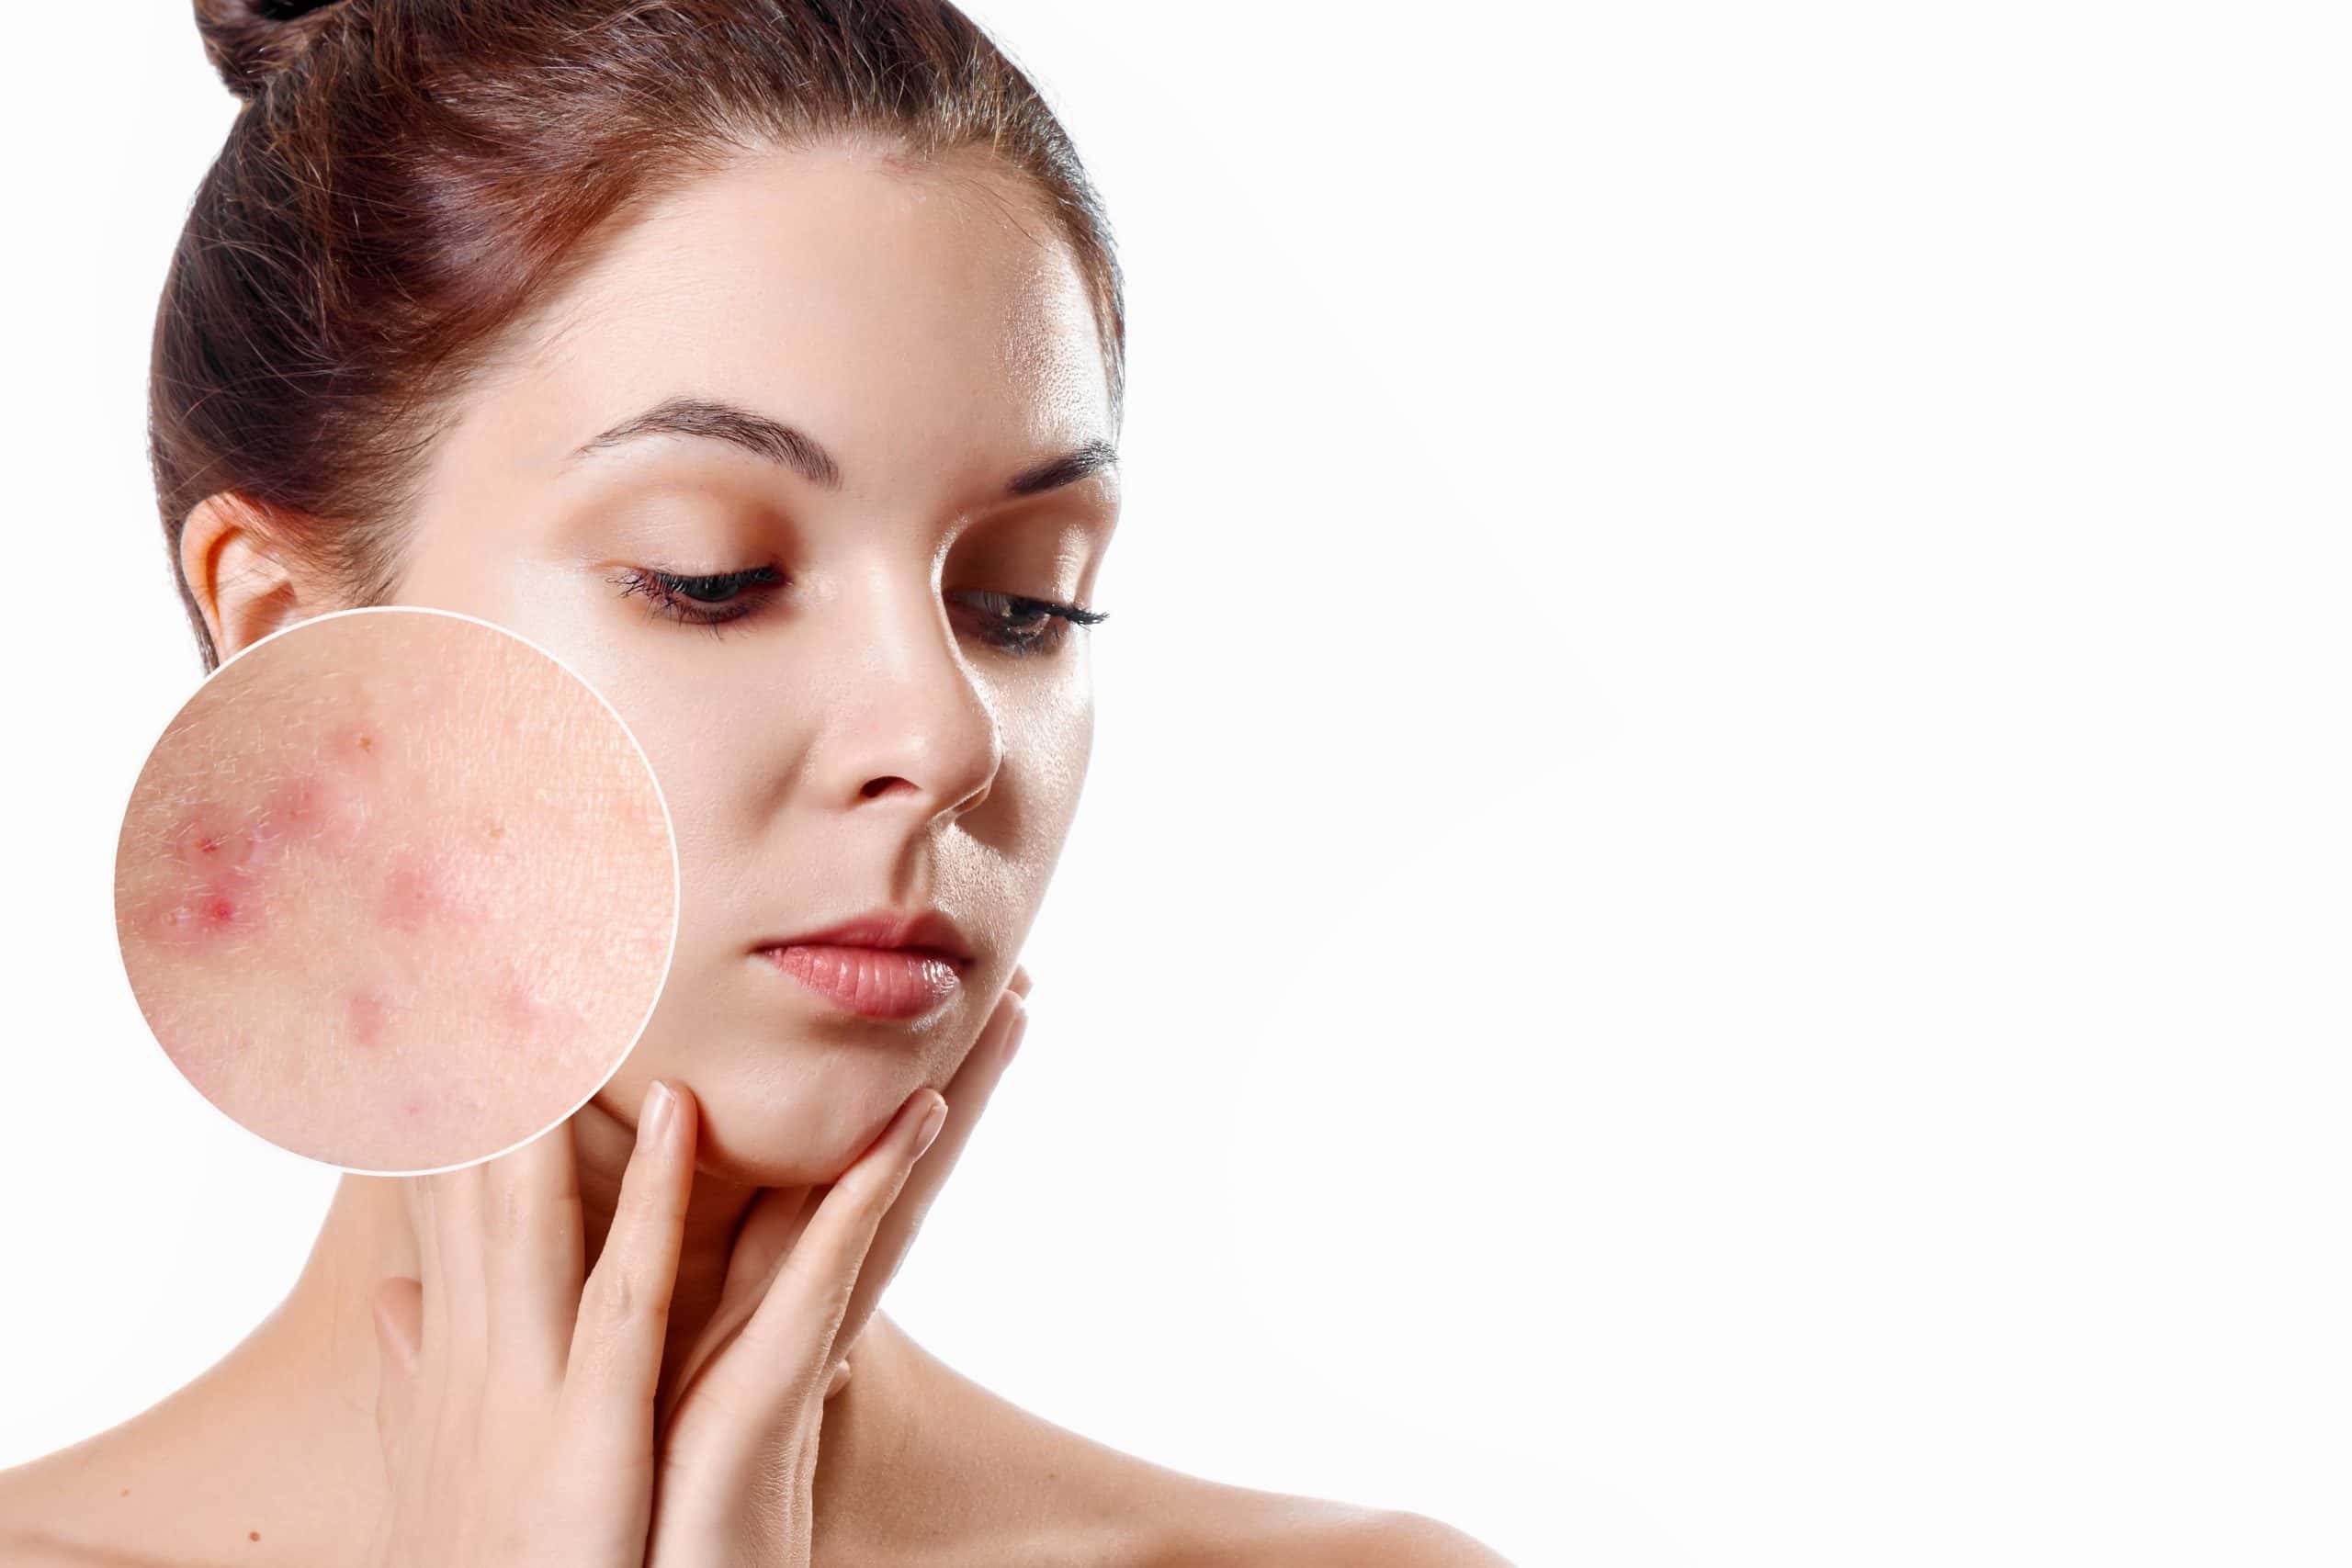 What is the Best Treatment for Acne Scars